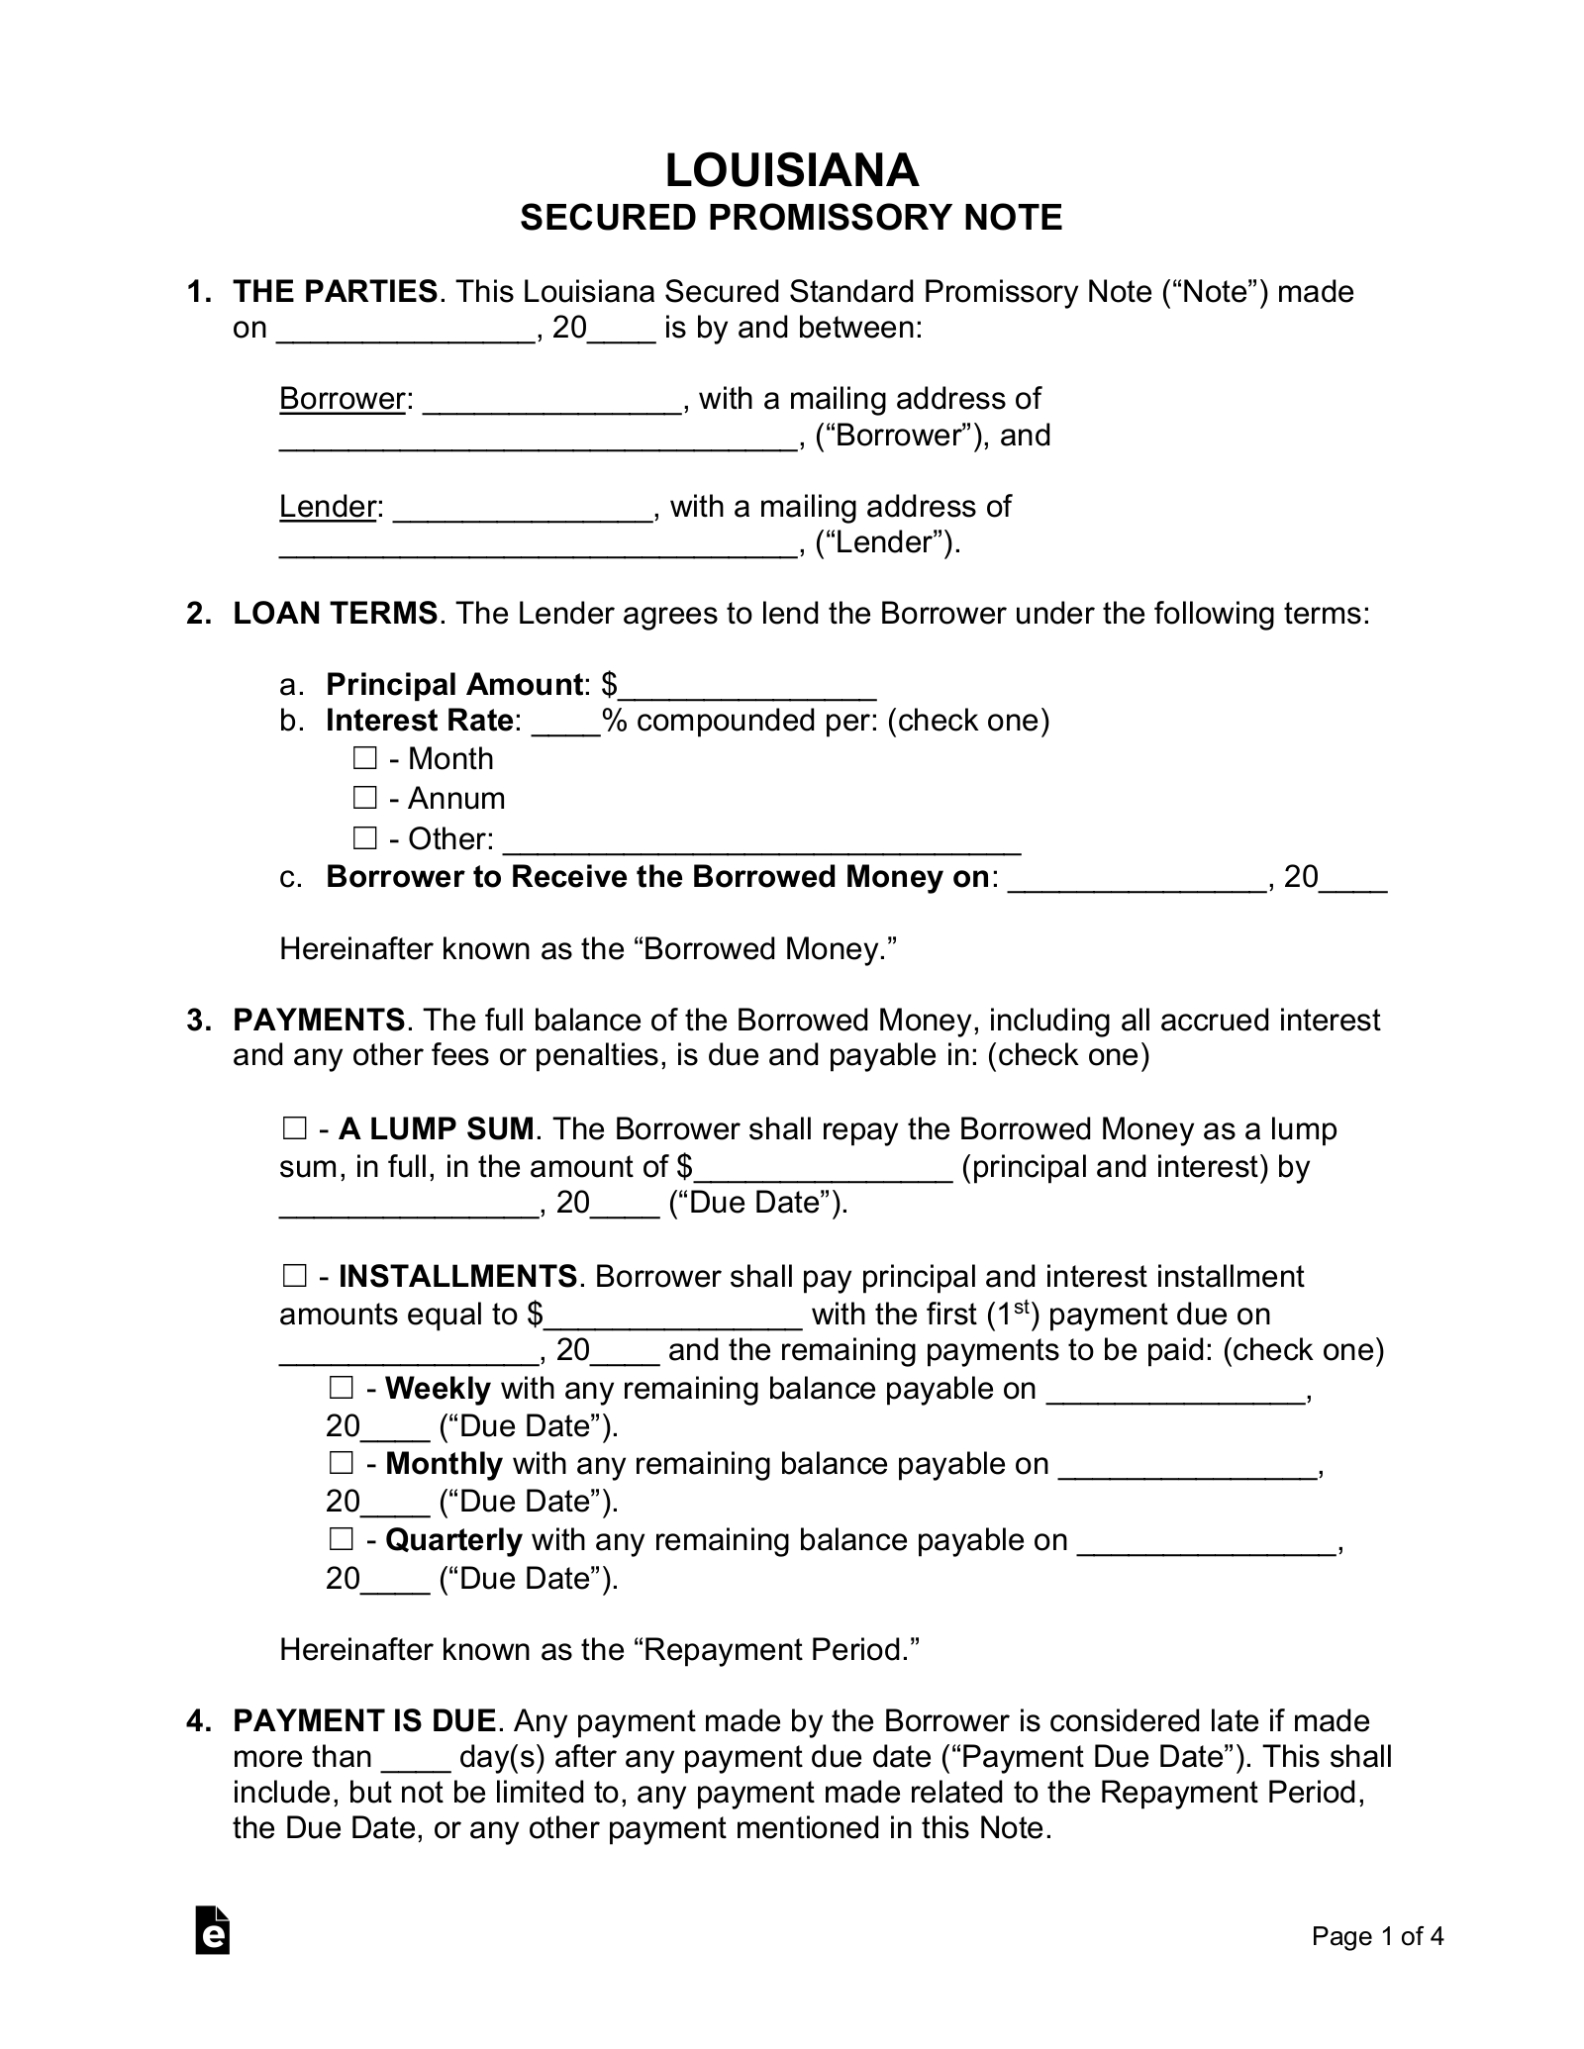 Free Louisiana Secured Promissory Note Template - Word | Pdf - Eforms Intended For Promisorry Note Template